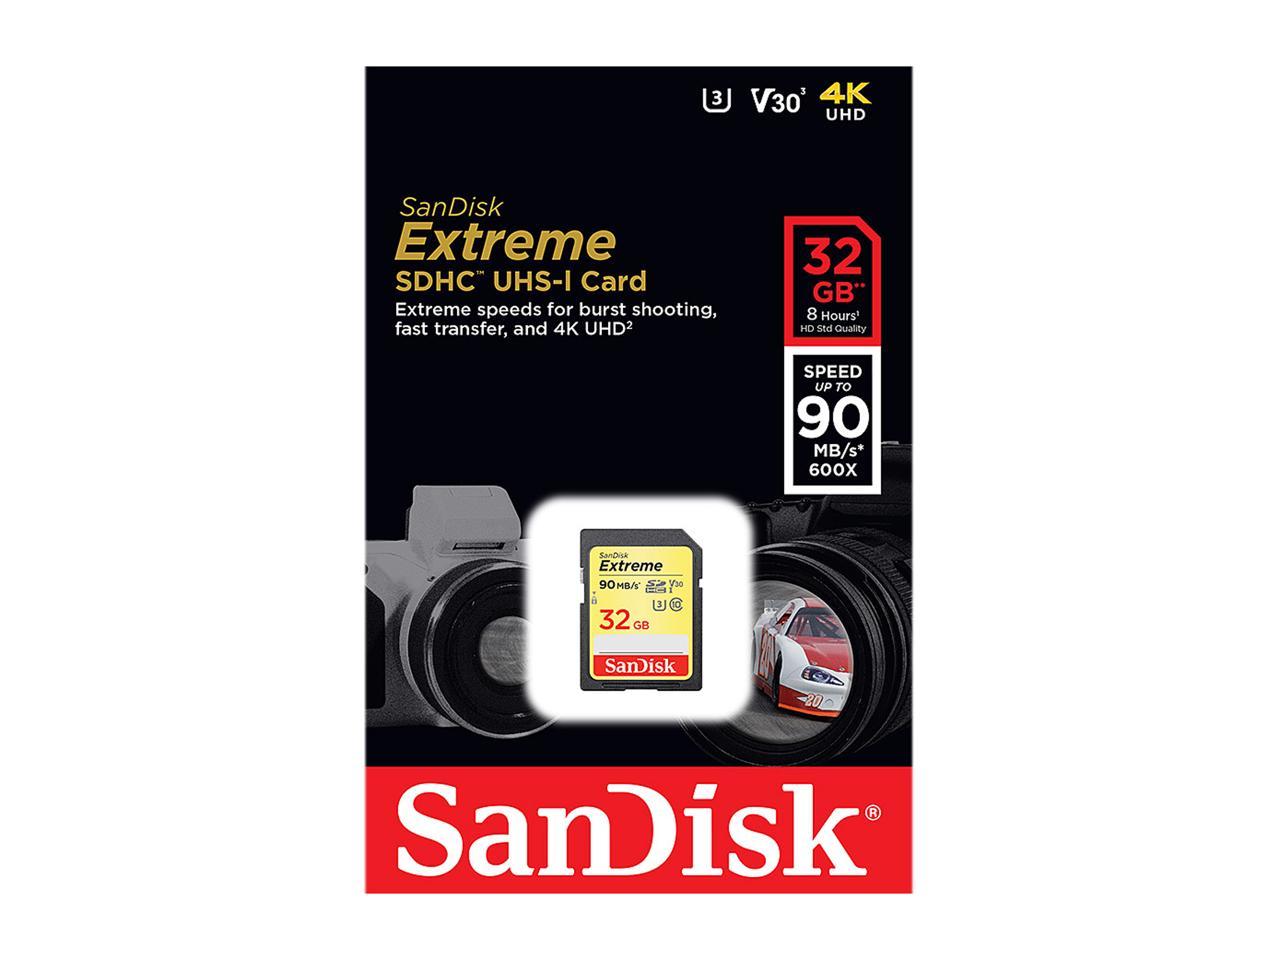 SanDisk 32GB Extreme SDHC UHS-I/U3 Class 10 Memory Card, Speed Up to 90MB/s (SDSDXVE-032G-GNCIN)